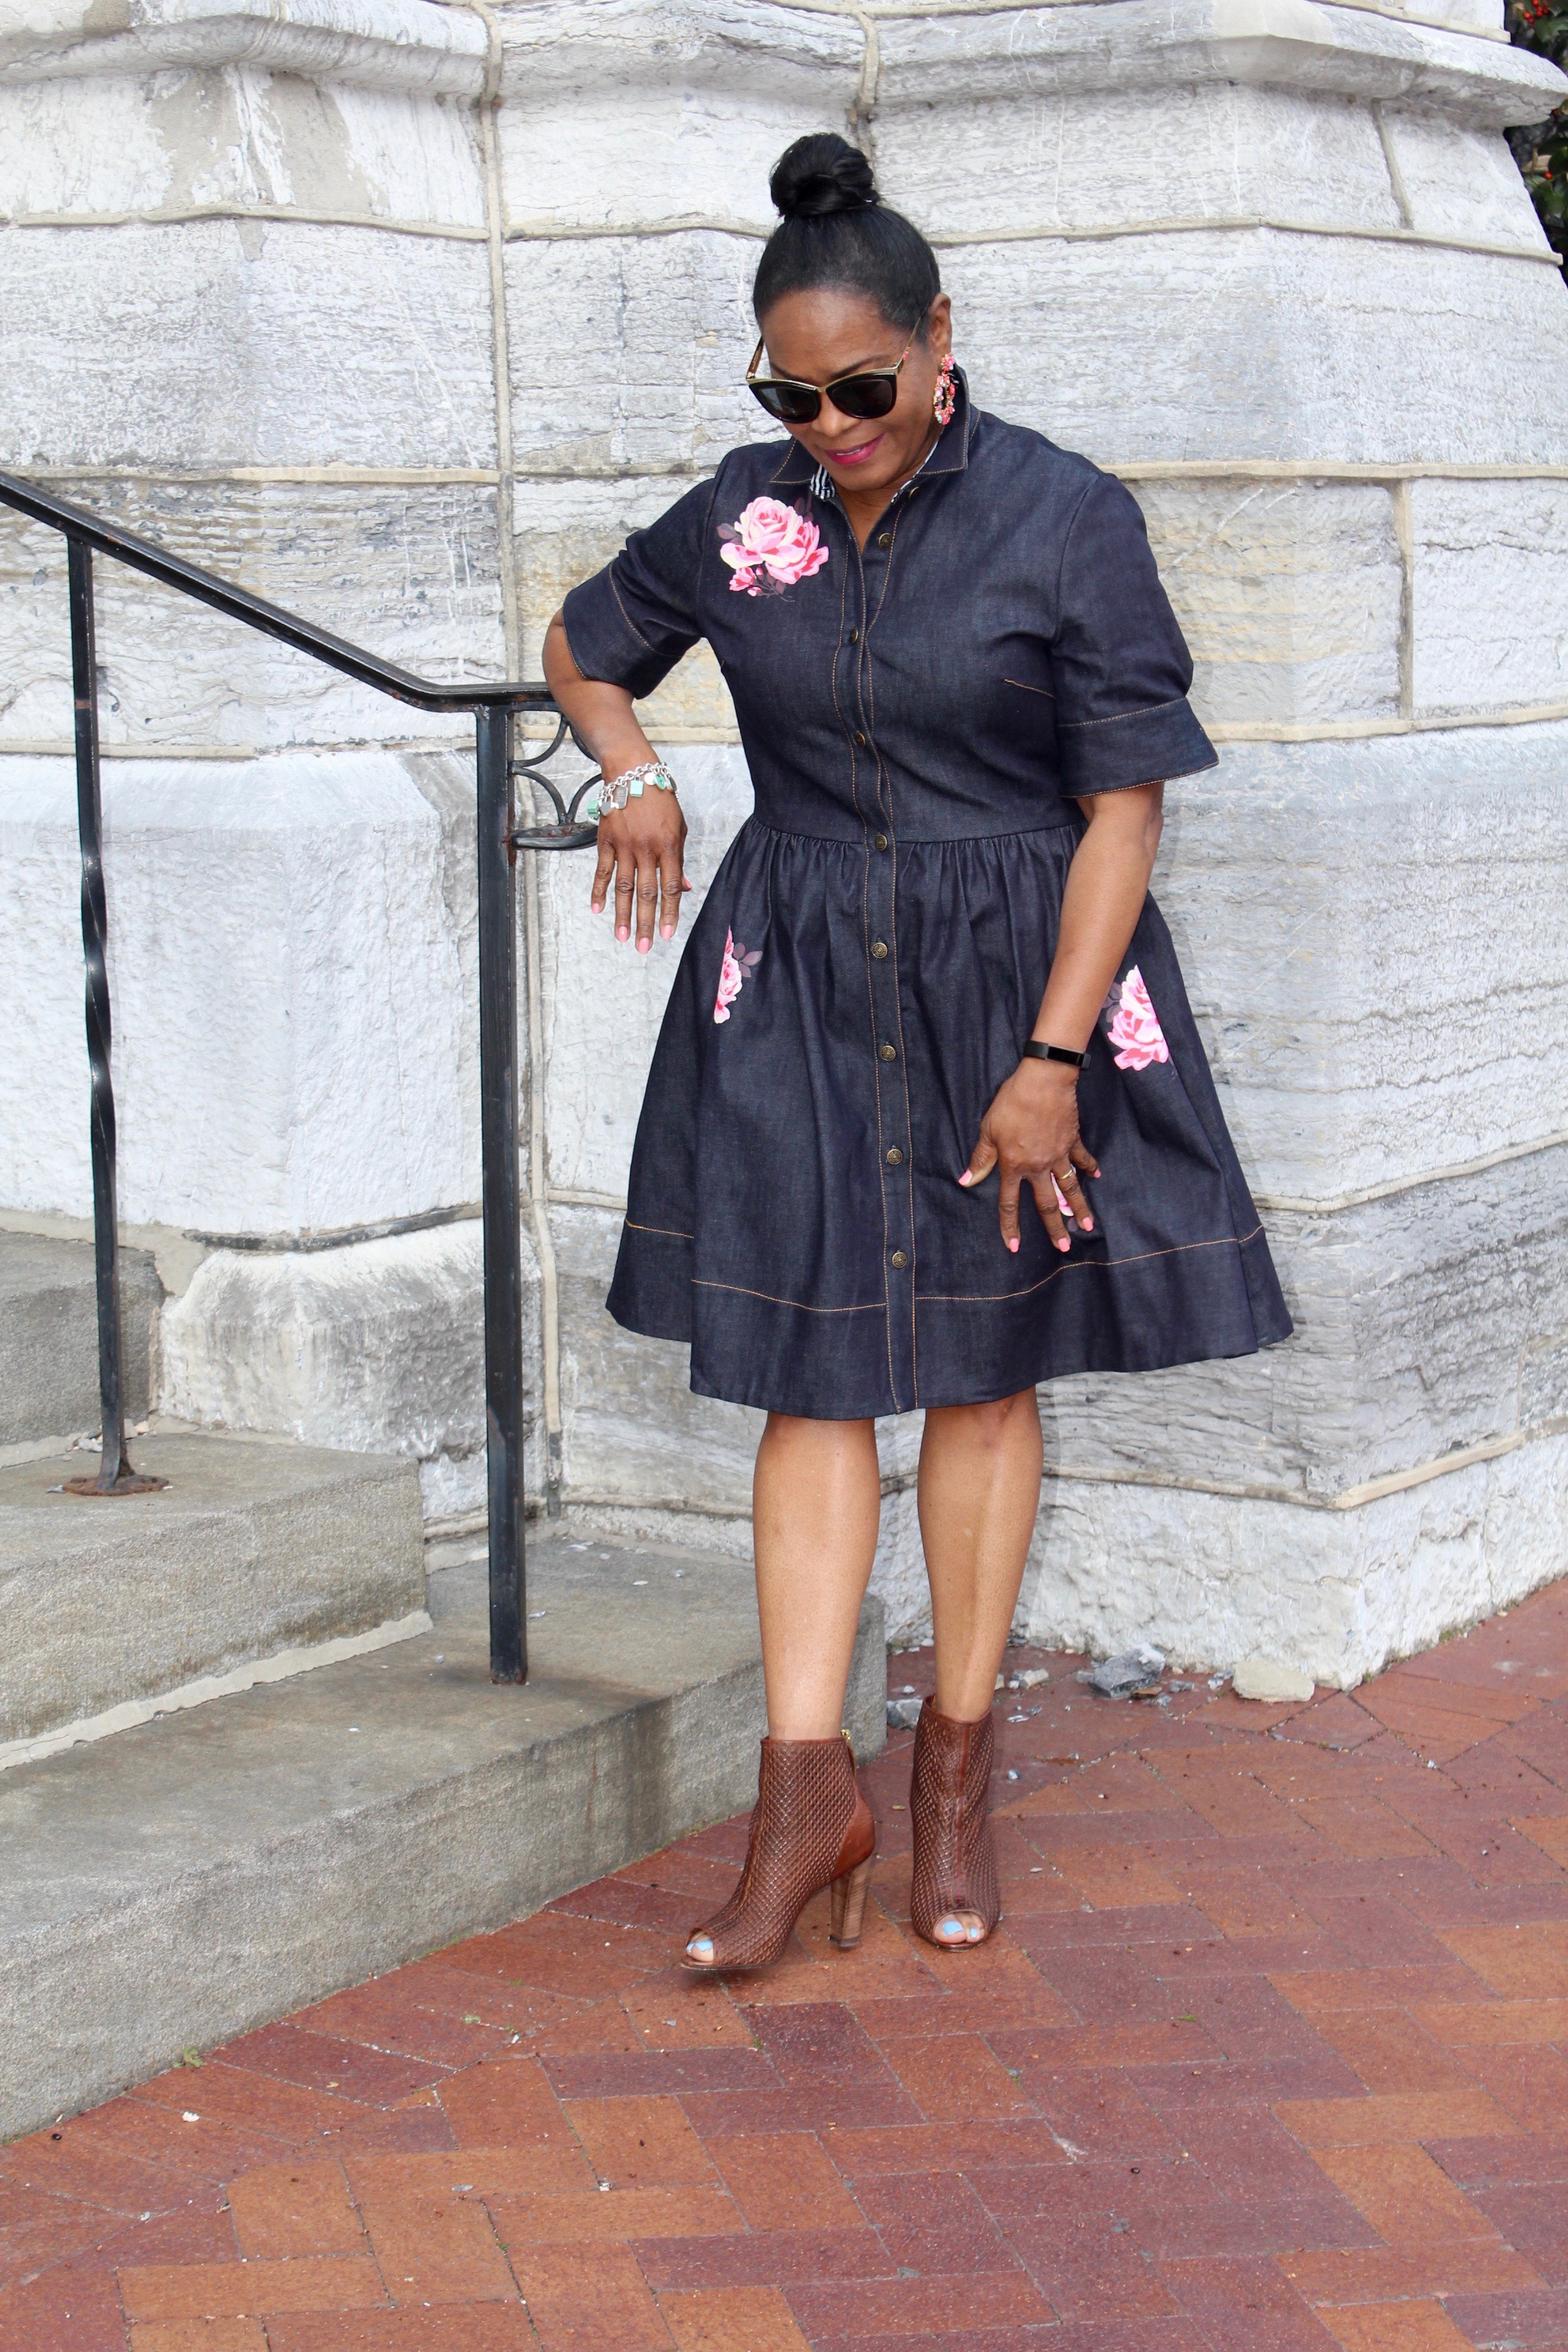 Ready for spring with Kate Spade Embroidered Denim Dress